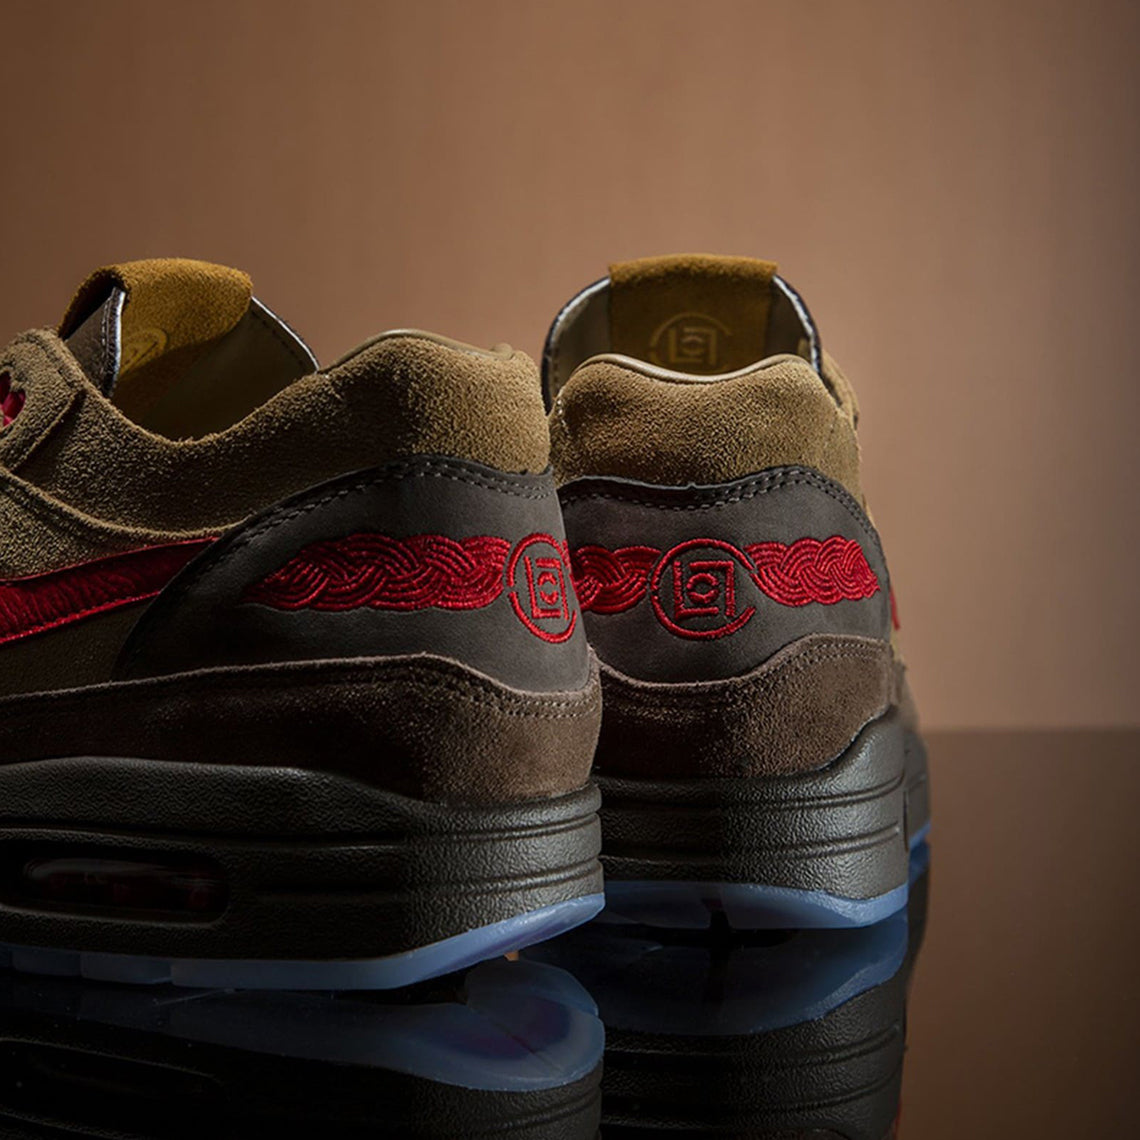 Nike Air Max 1 CLOT K.O.D 2021 Sneaker Release Temple Wear Blog News Red Traditional Logo  Swoosh Red Brown Japanese Tea Inspired Transparent Running Shoes Kiss Of Dead Sneaker Release